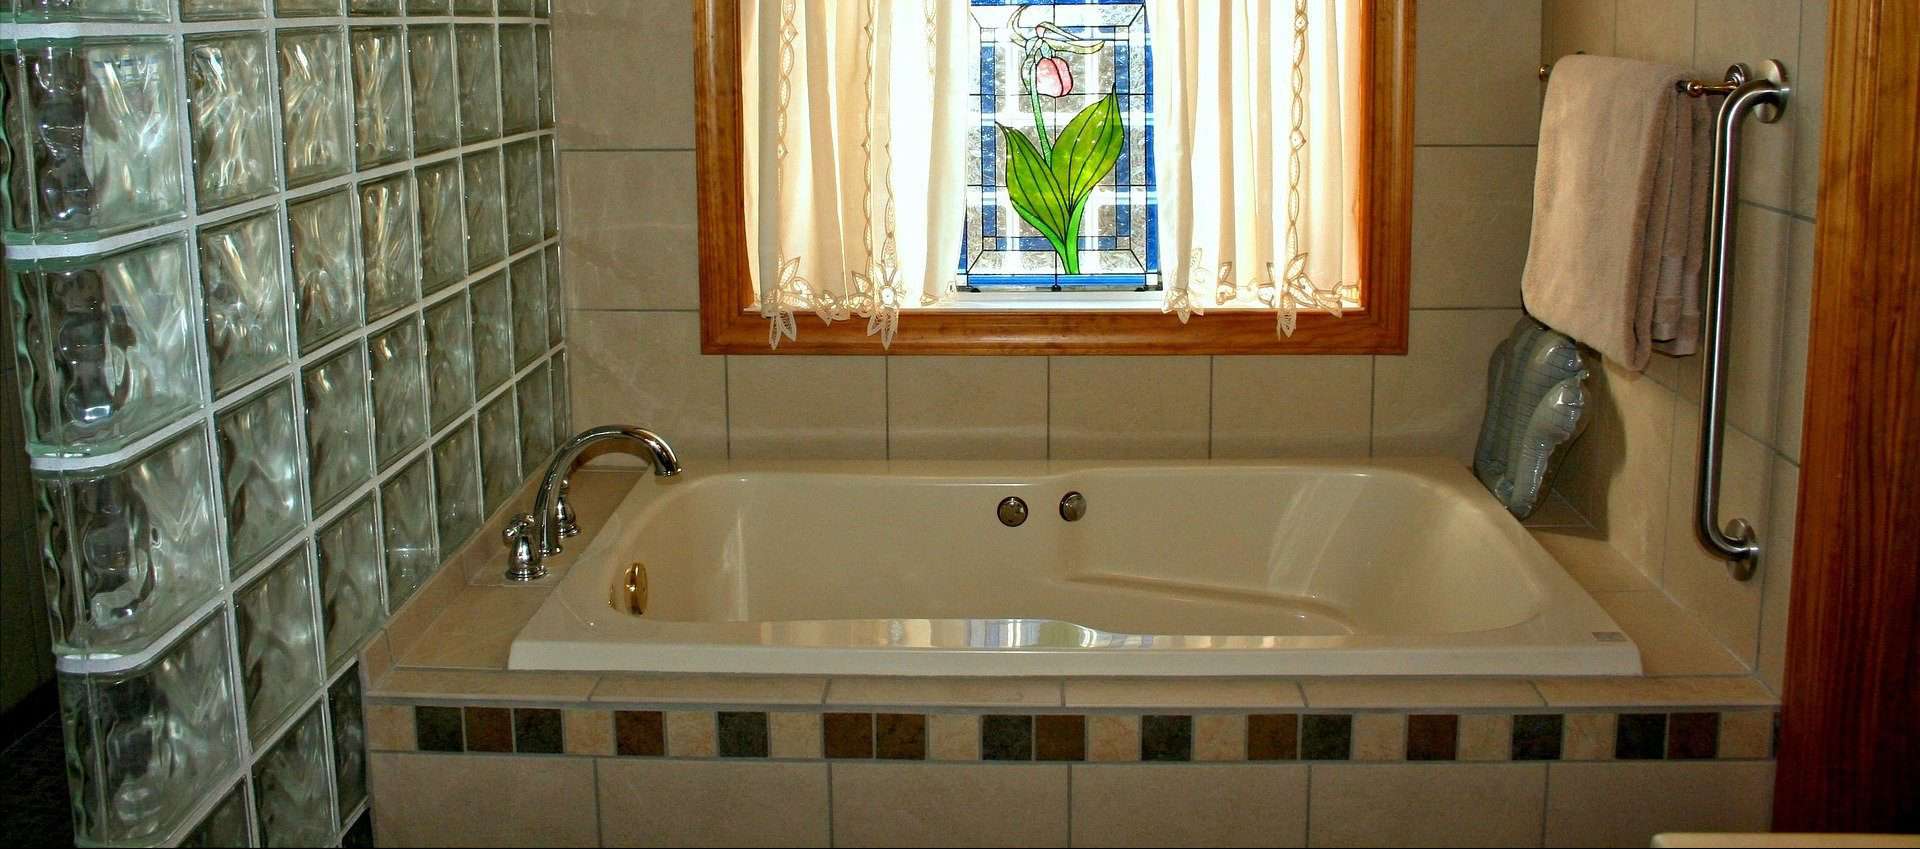 How to soundproof a bathtub in bathroom